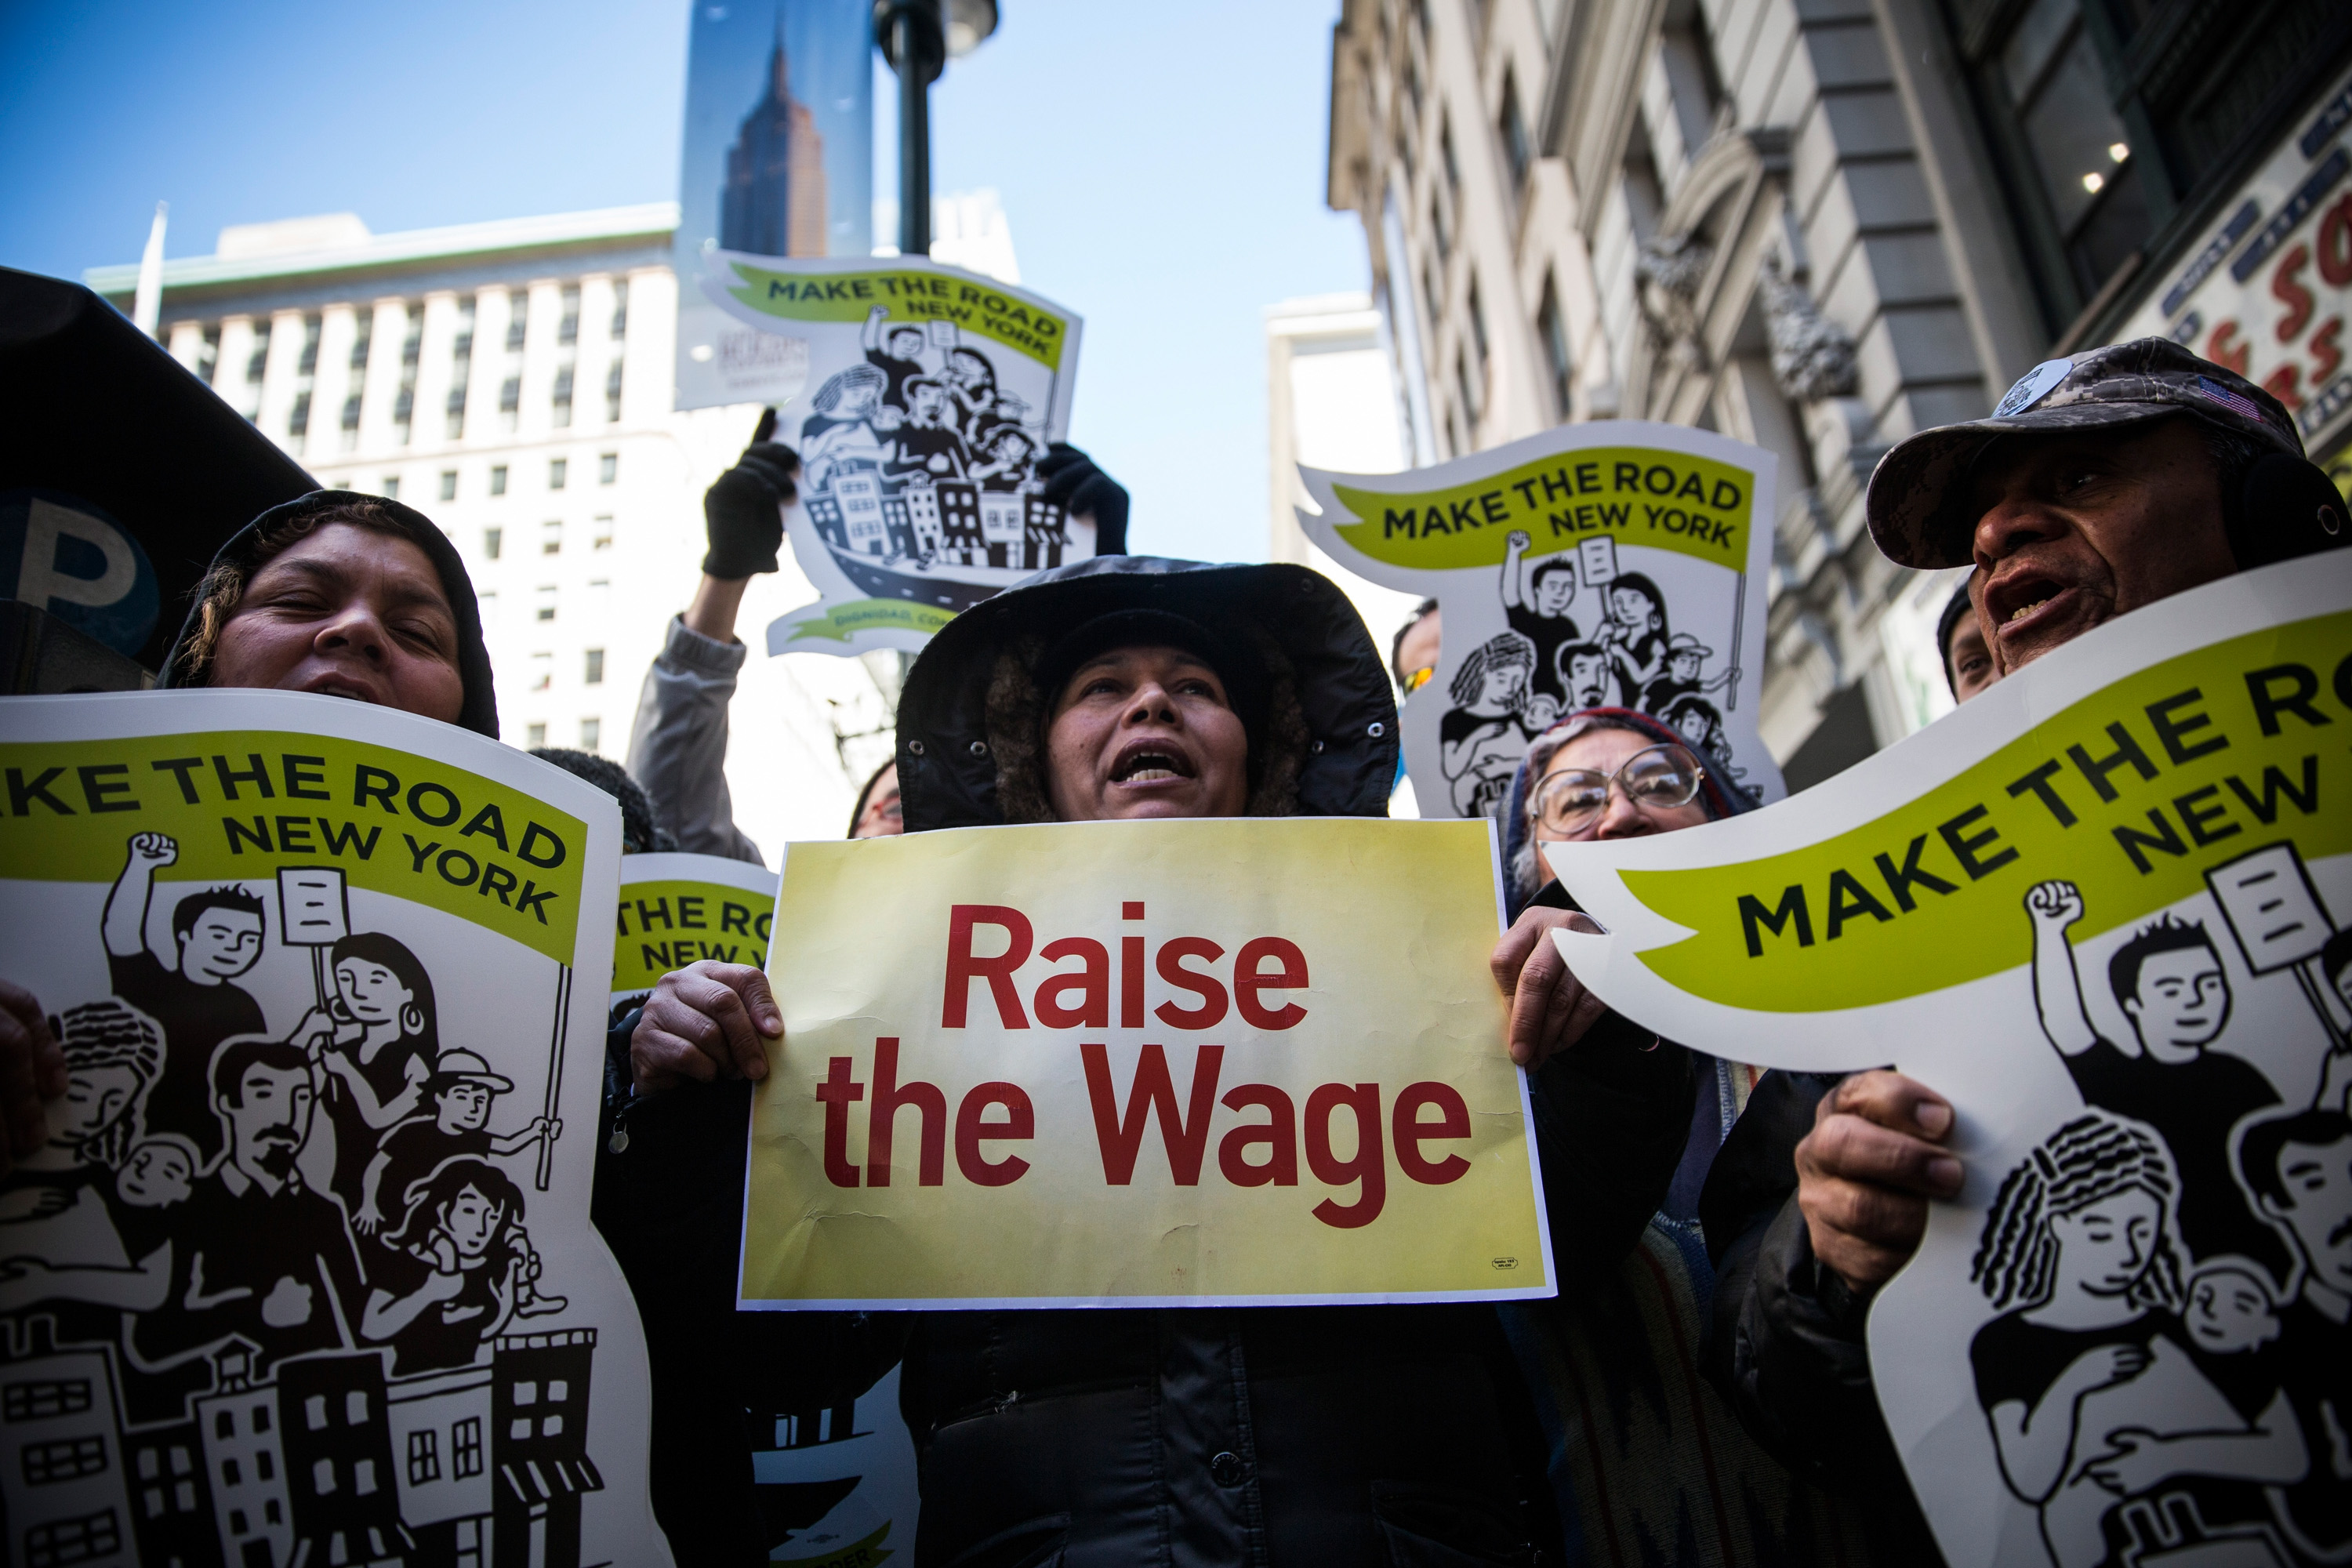 Women hold banners during a protest for higher wages for fast food workers on March 18, 2014 in New York City. (Andrew Burton--Getty Images)